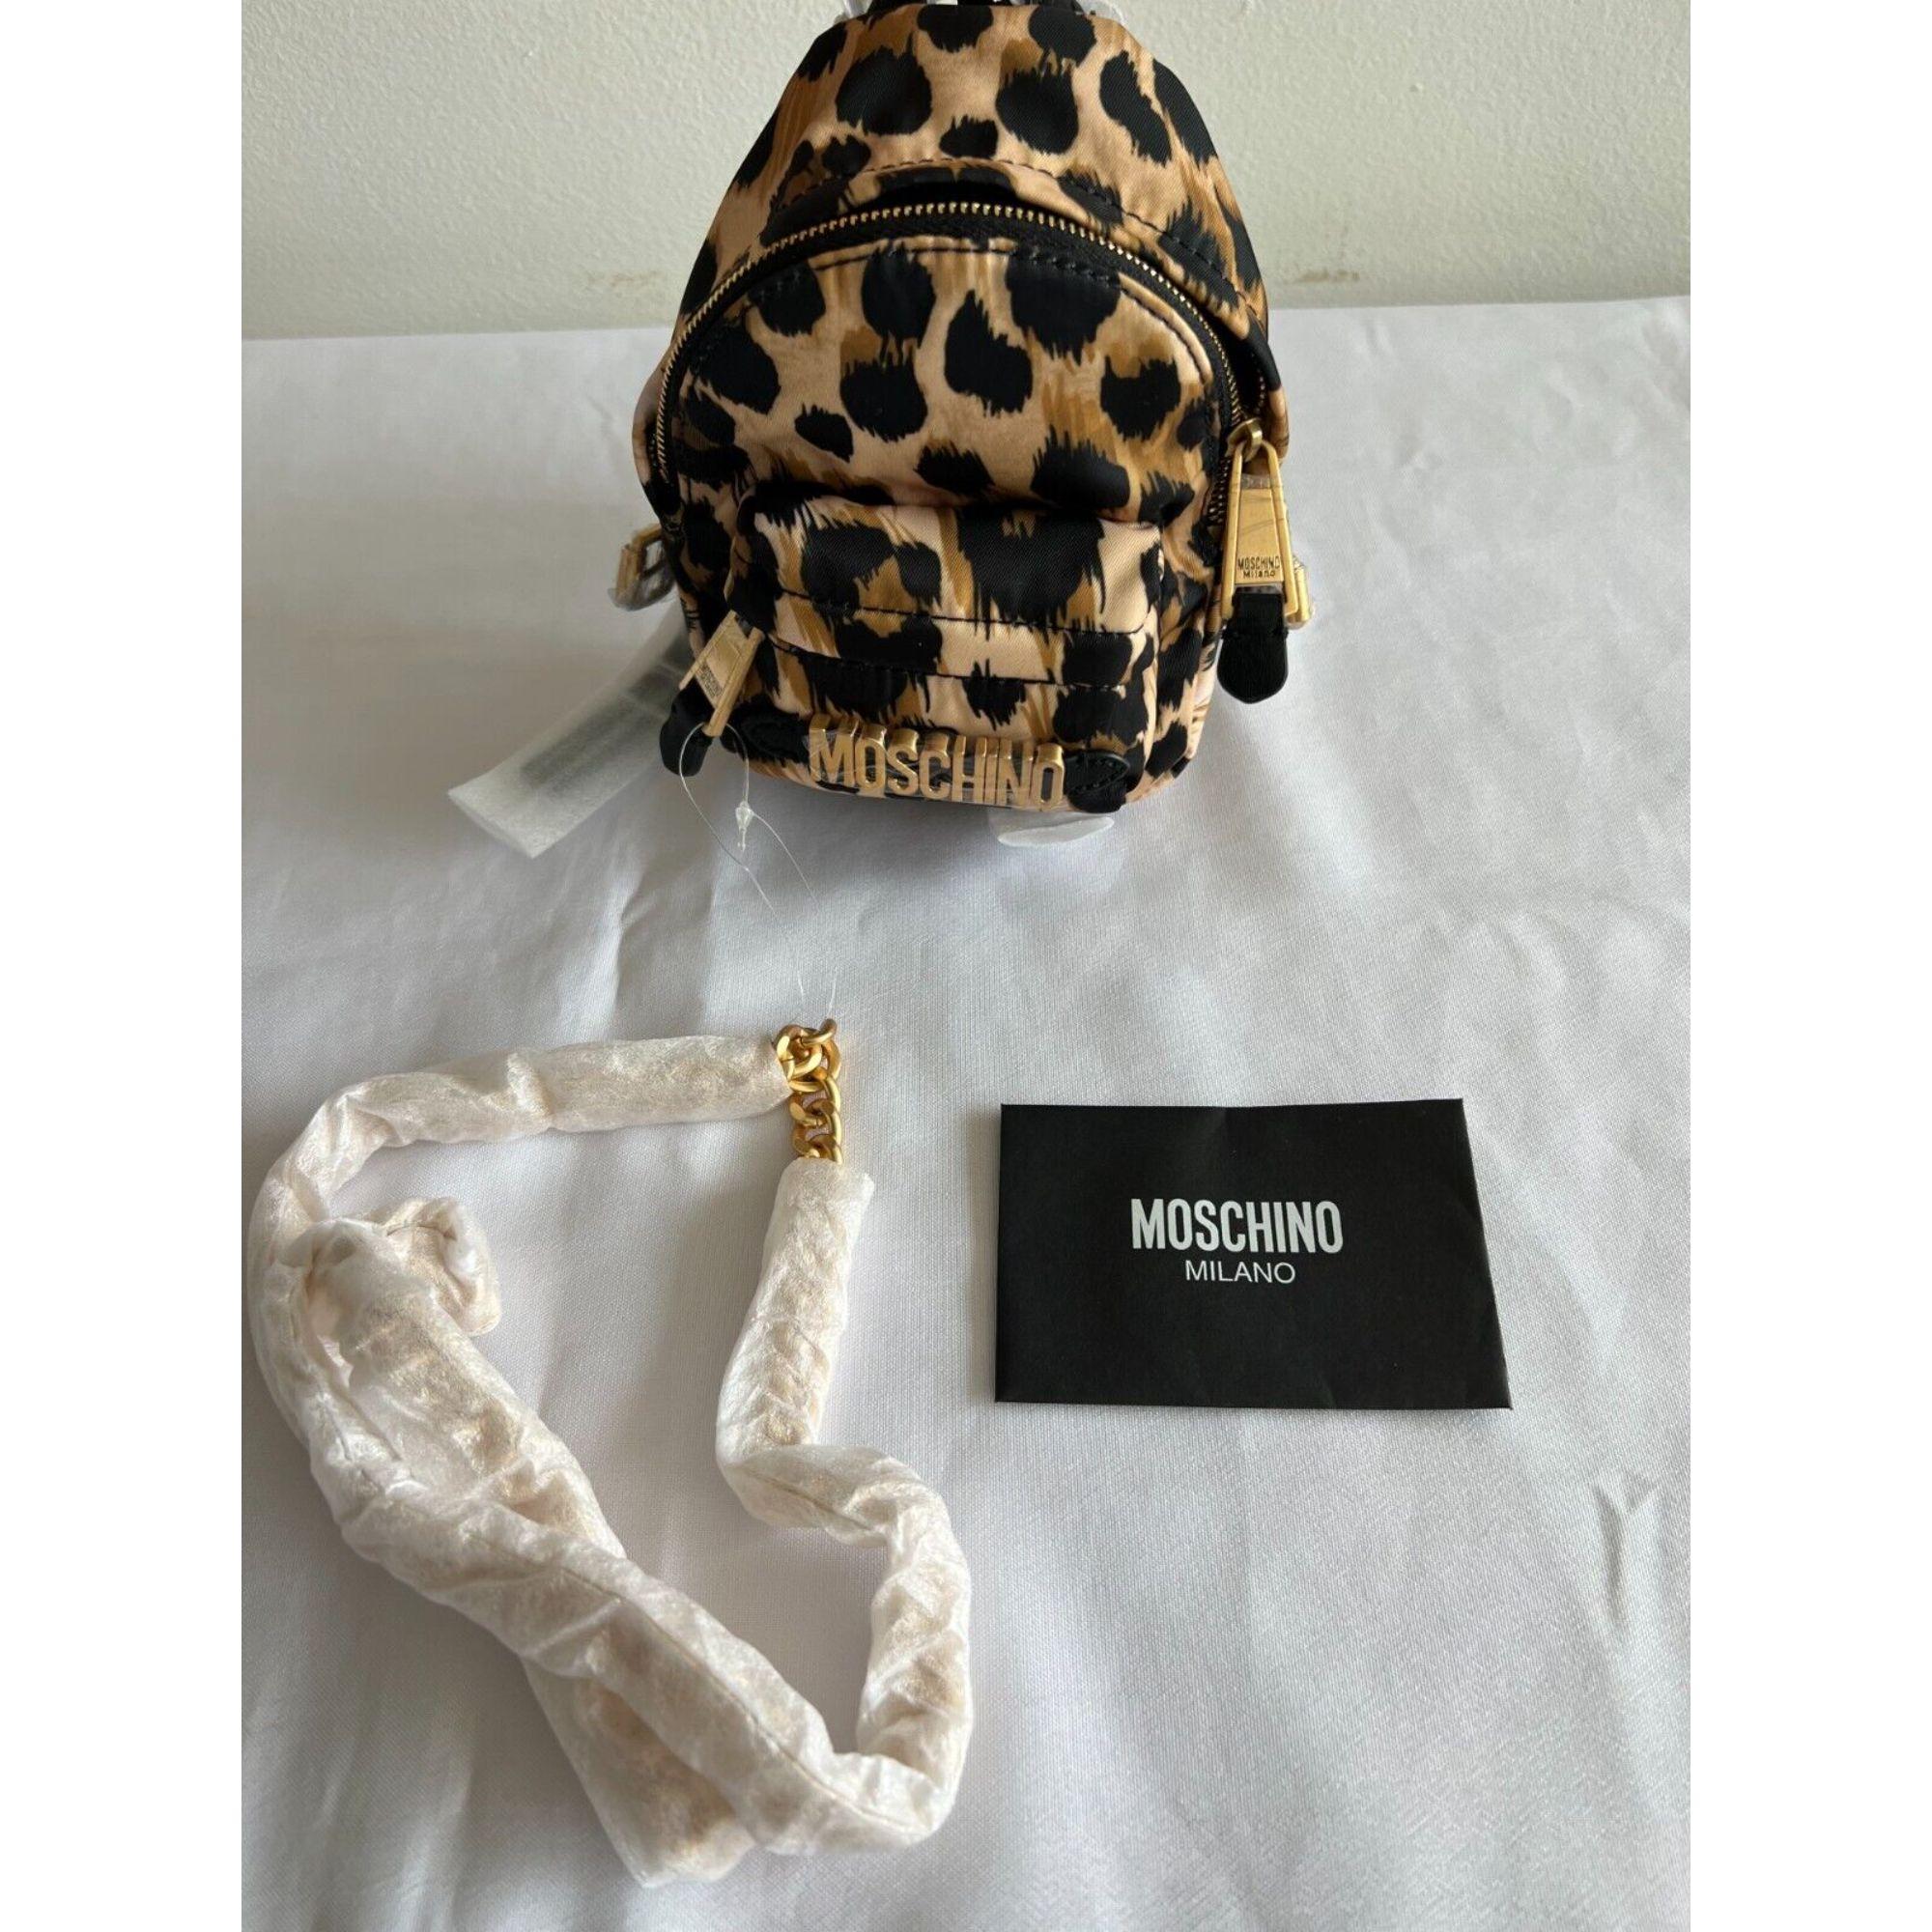 AW21 Moschino Couture Leopard Print Shoulder Bag Mini Backpack by Jeremy Scott For Sale 2